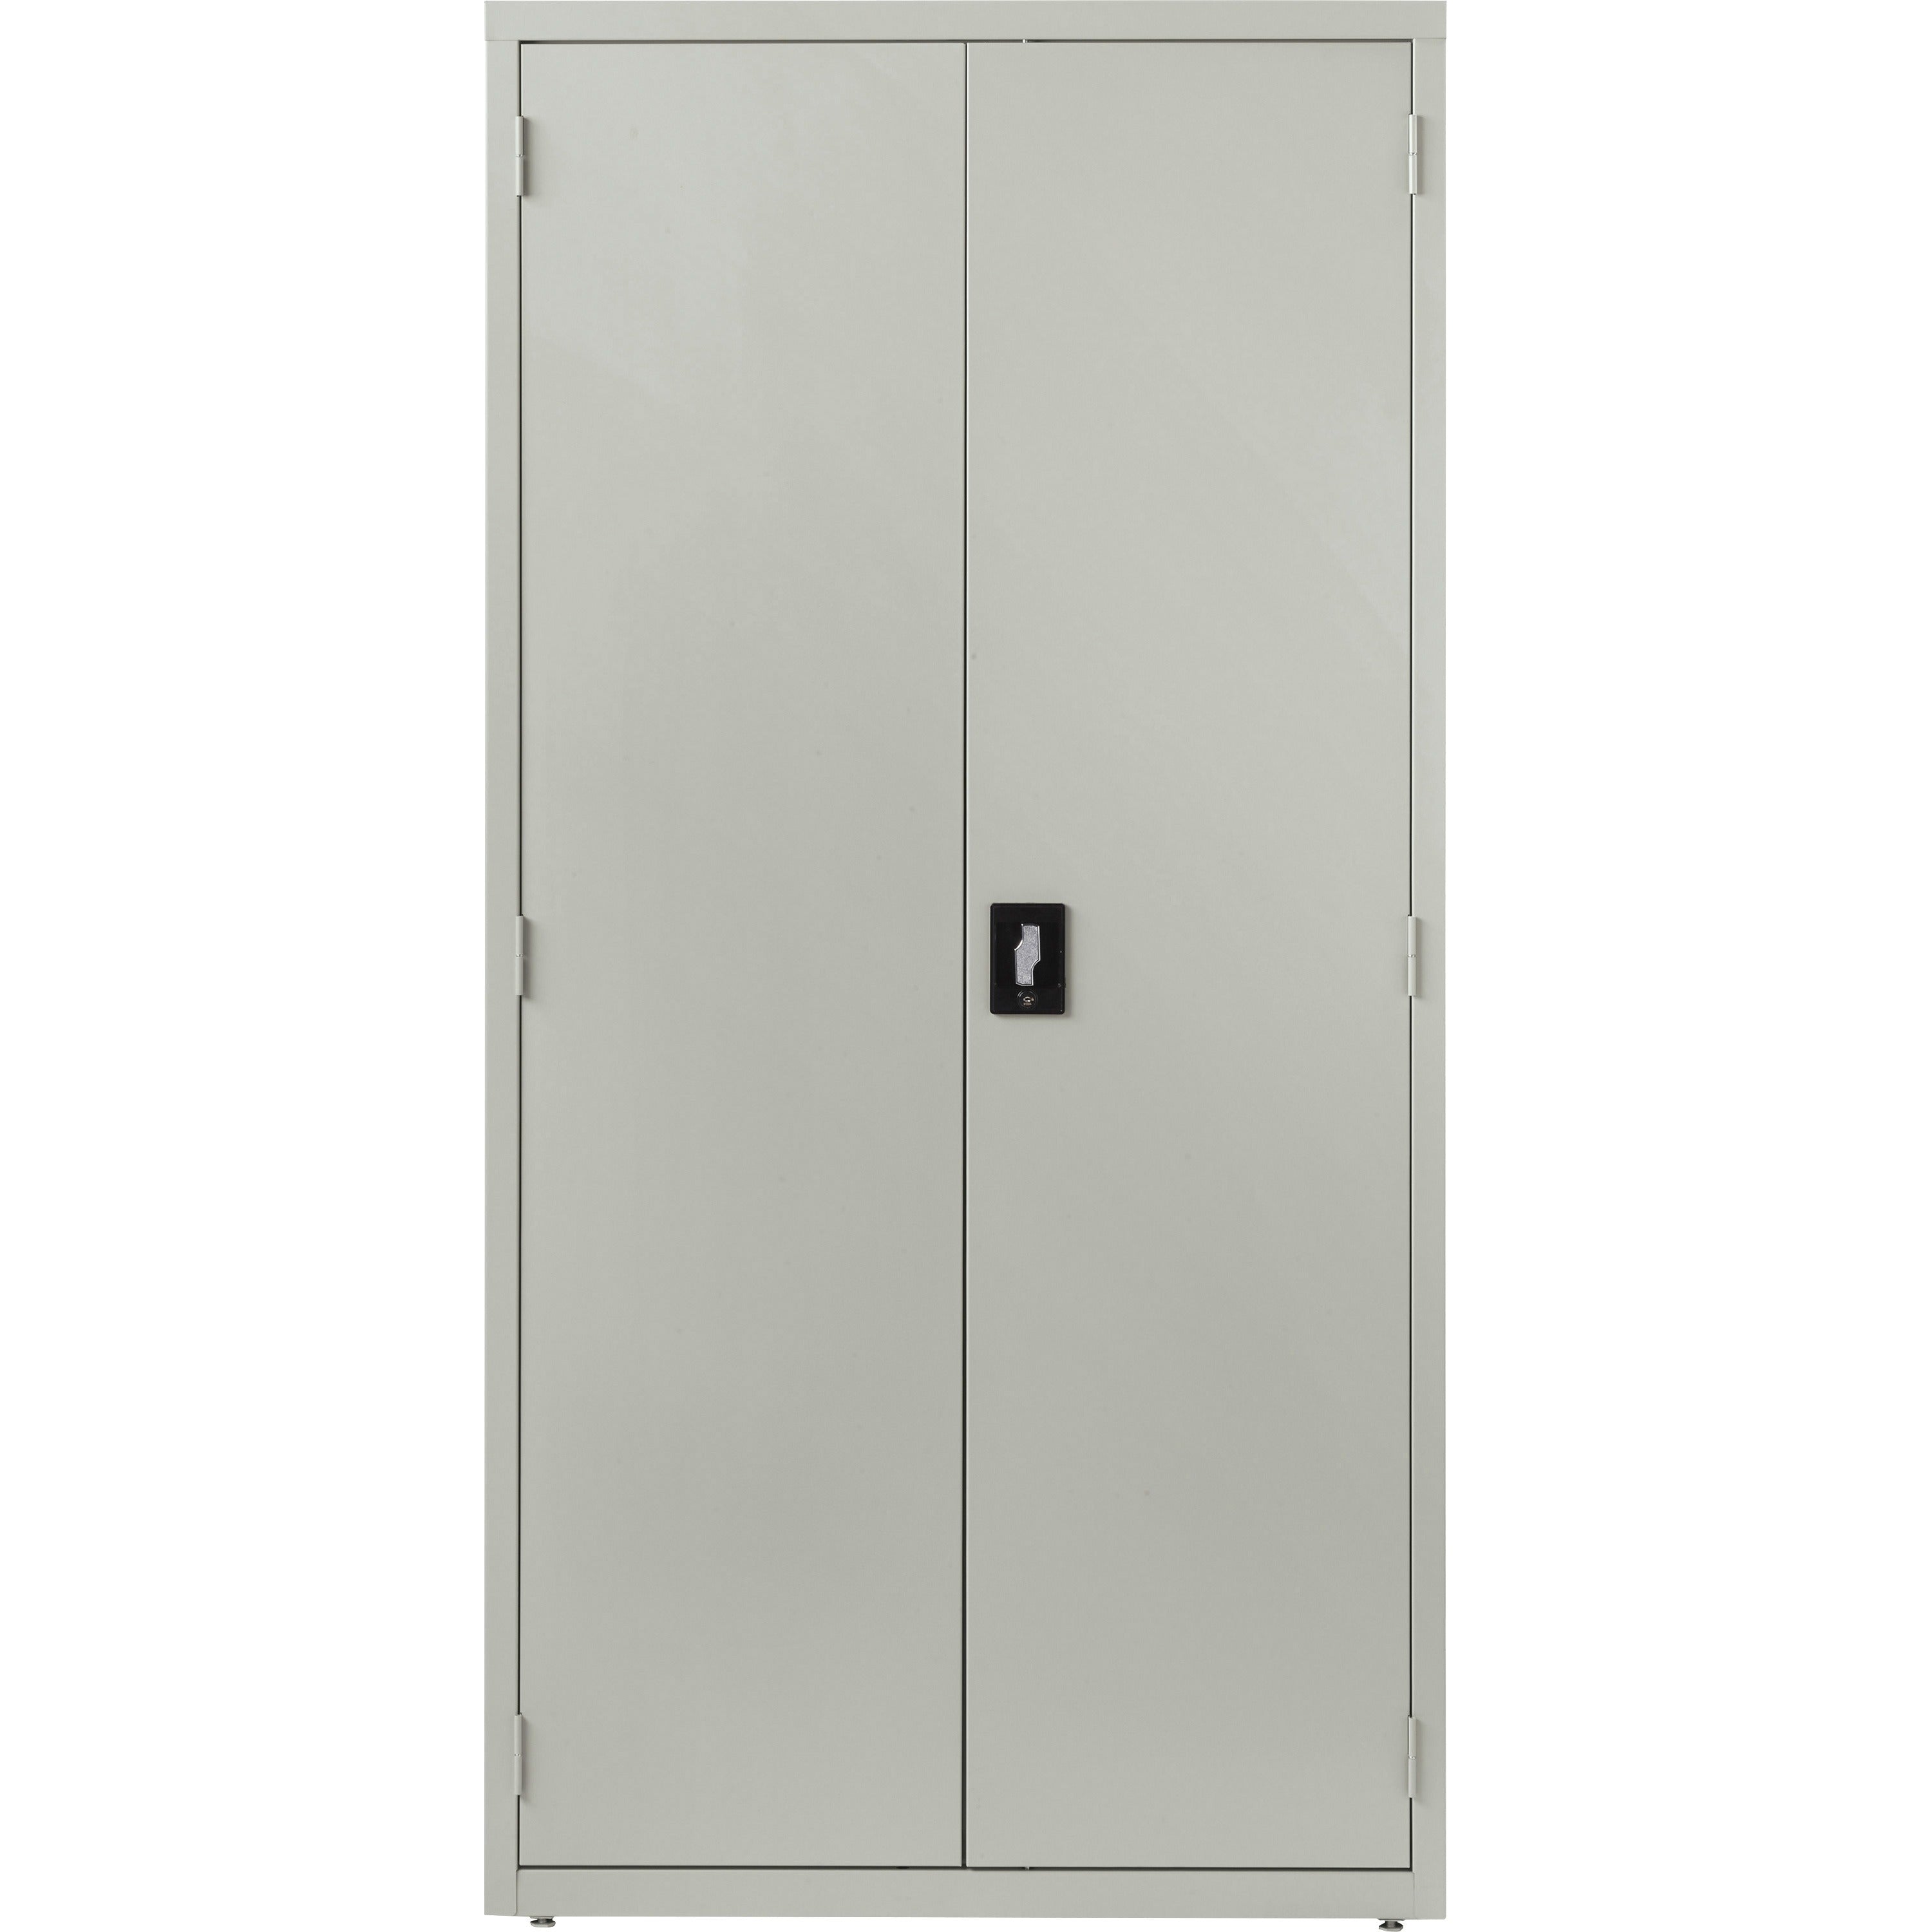 lorell-fortress-series-storage-cabinet-24-x-36-x-72-5-x-shelfves-hinged-doors-sturdy-recessed-locking-handle-removable-lock-durable-storage-space-light-gray-powder-coated-steel-recycled_llr34411 - 2